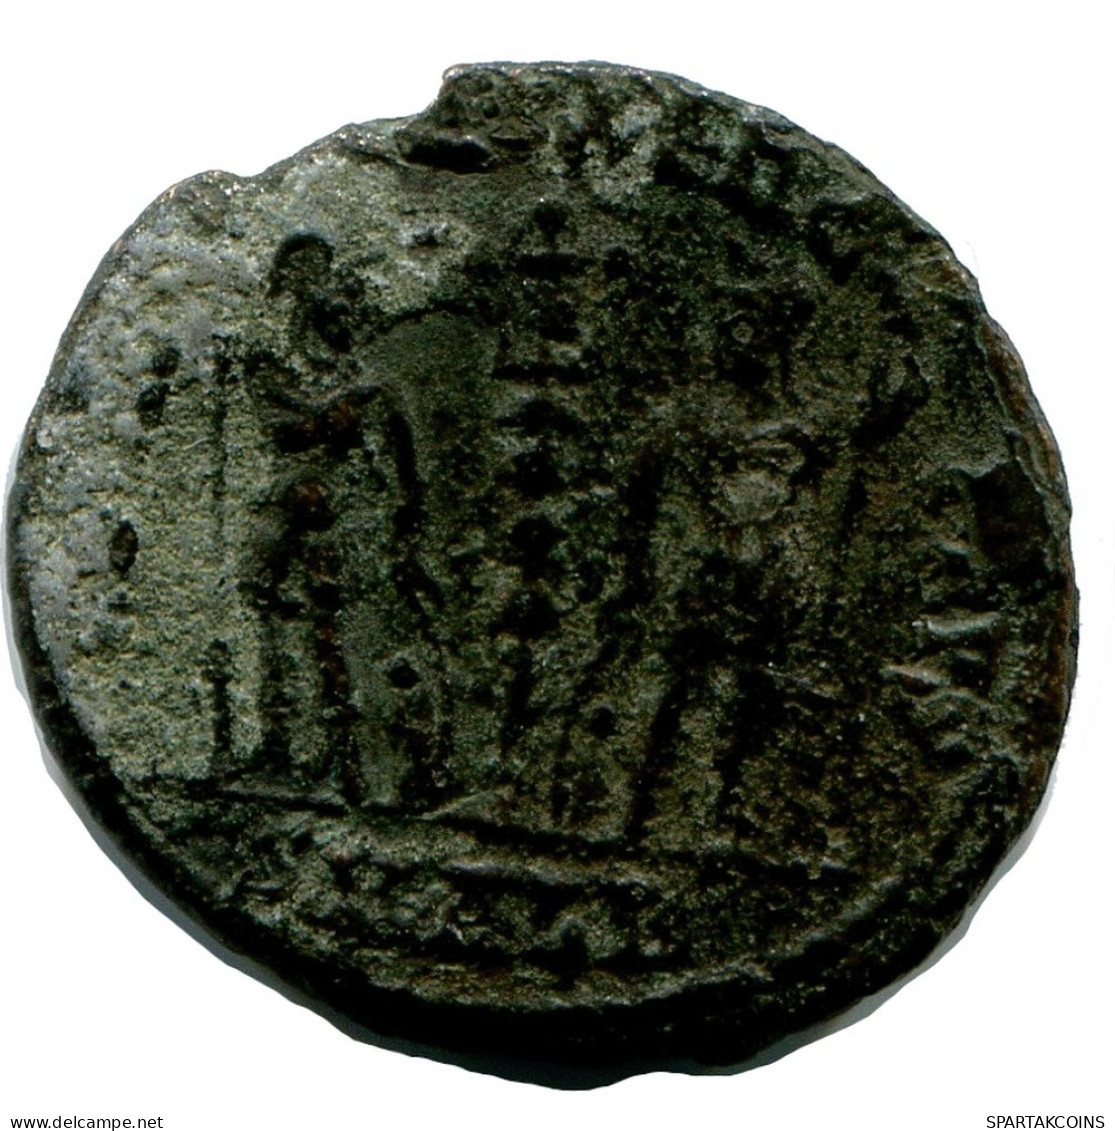 RÖMISCHE MINTED IN ALEKSANDRIA FROM THE ROYAL ONTARIO MUSEUM #ANC10182.14.D.A - El Imperio Christiano (307 / 363)